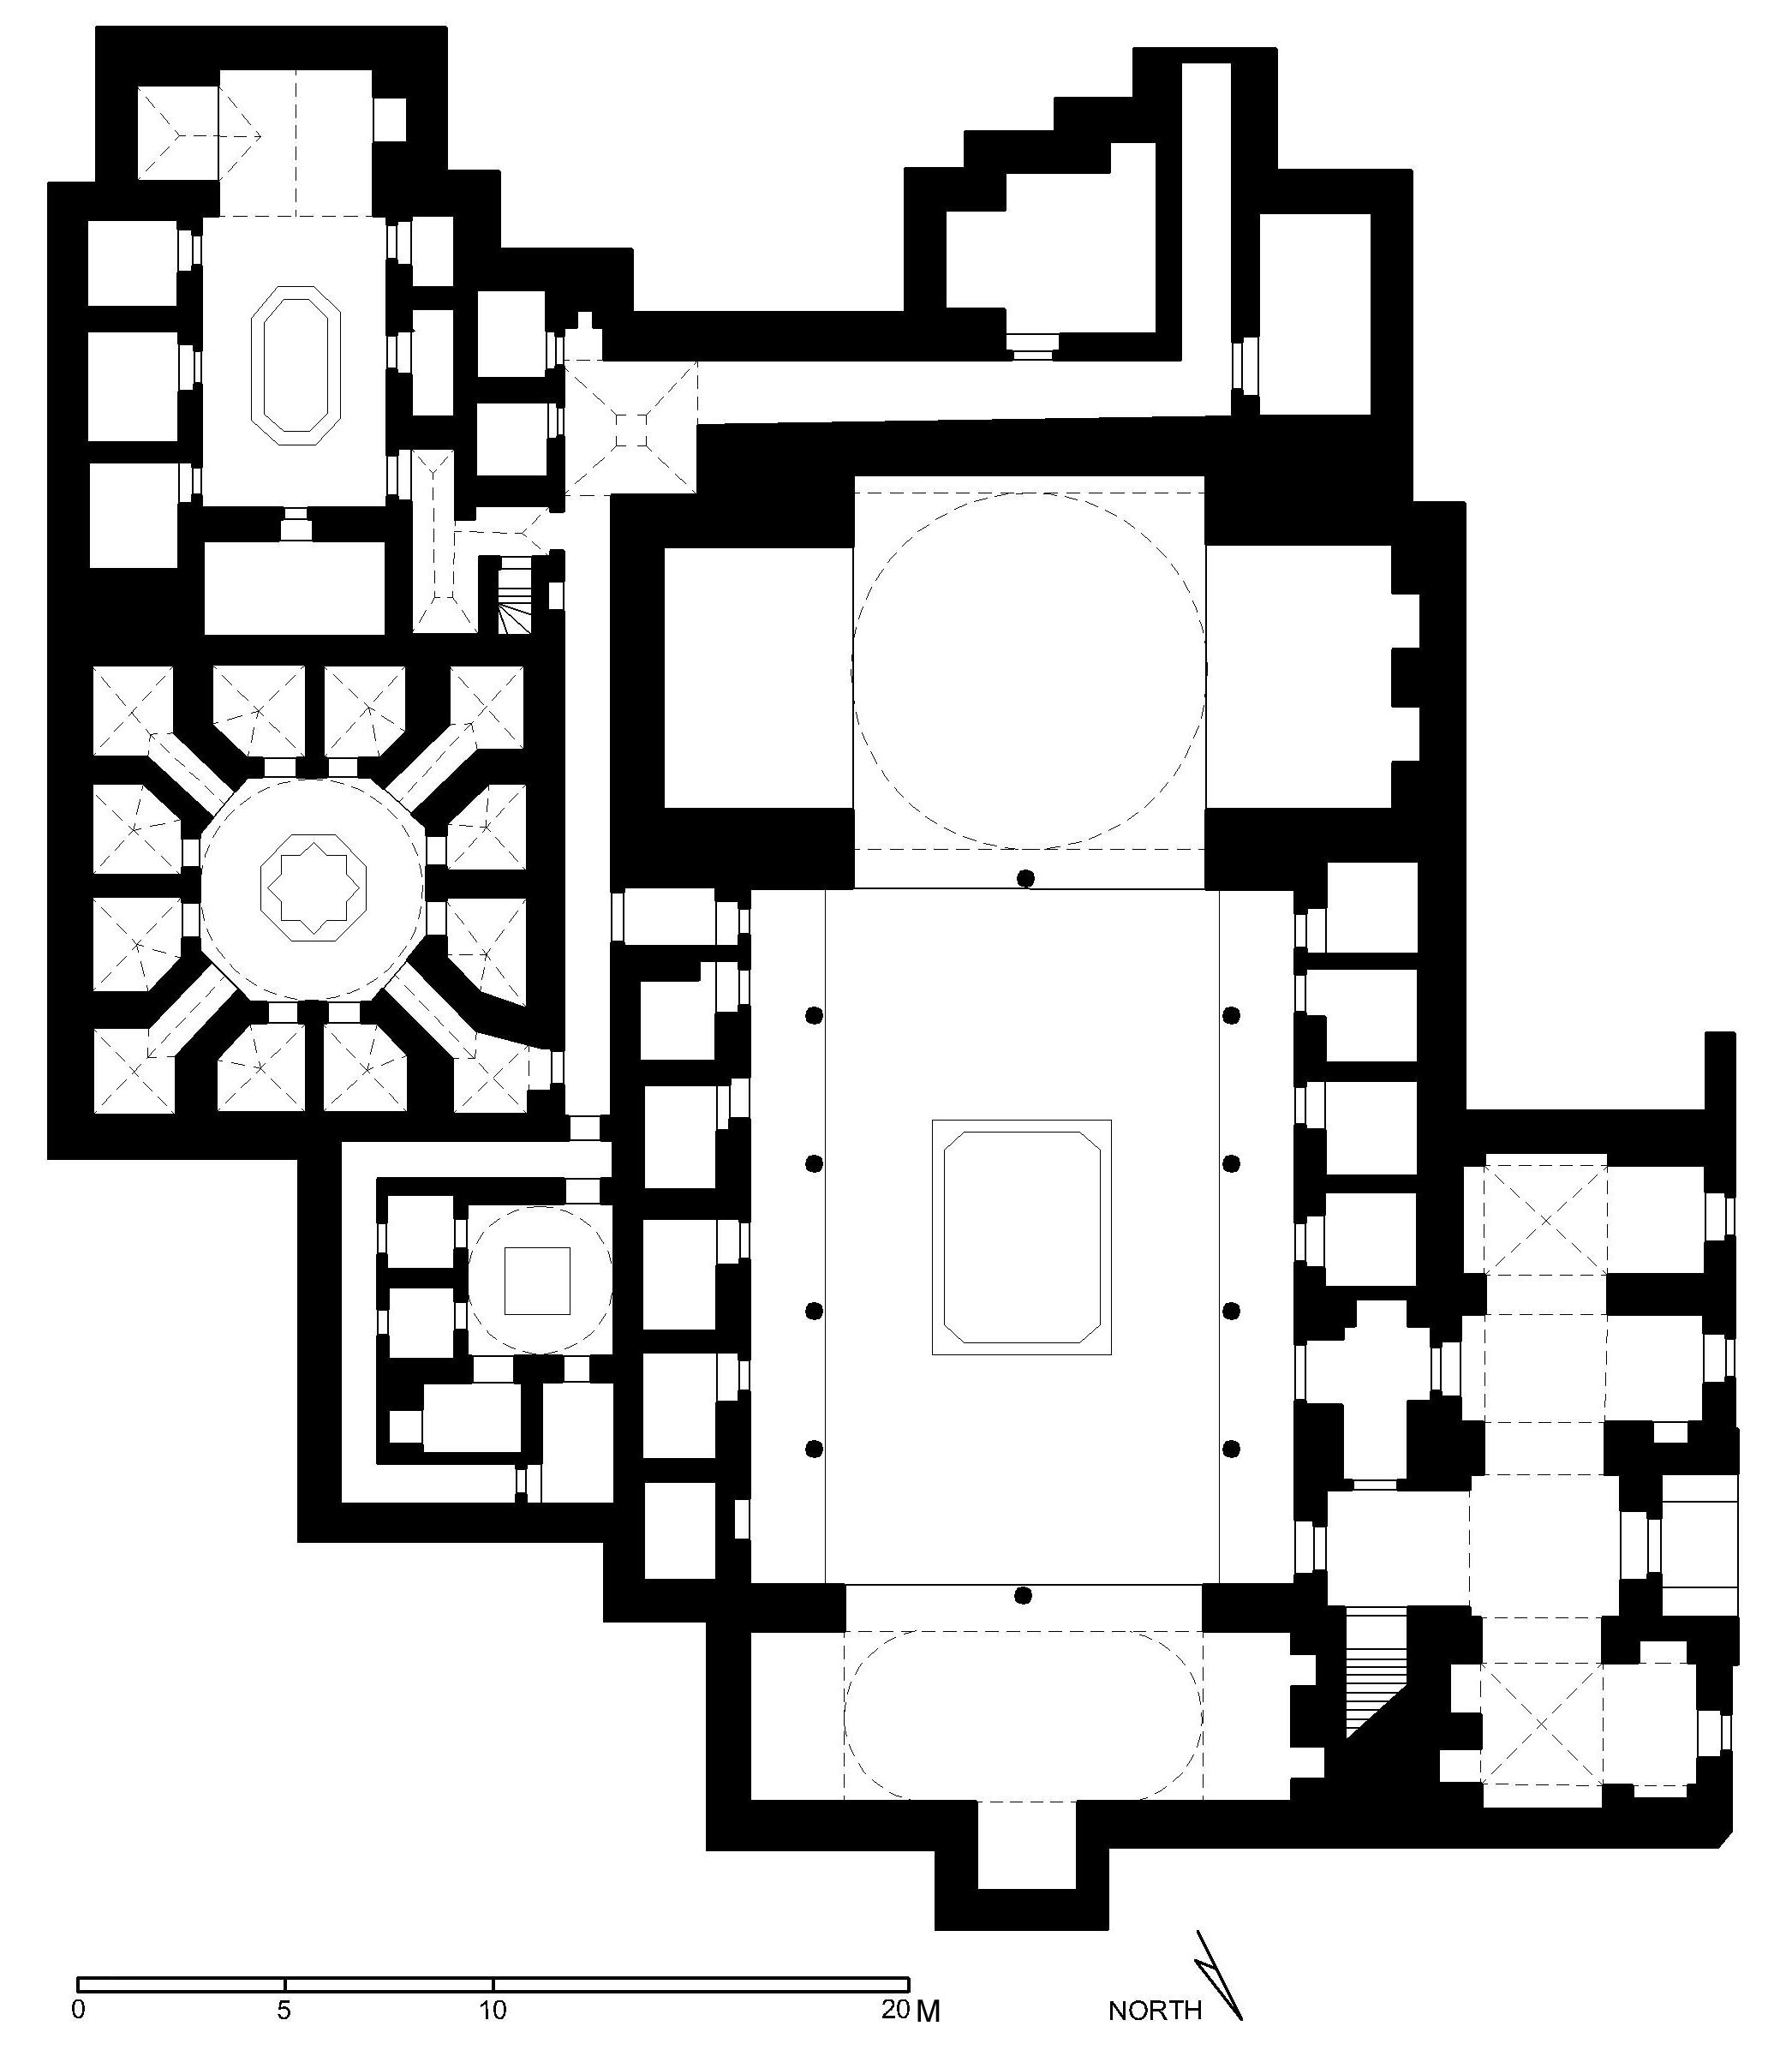 Bimaristan Arghun al-Kamili - Floor plan of maristan (after Meinecke) in AutoCAD 2000 format. Click the download button to download a zipped file containing the .dwg file. 